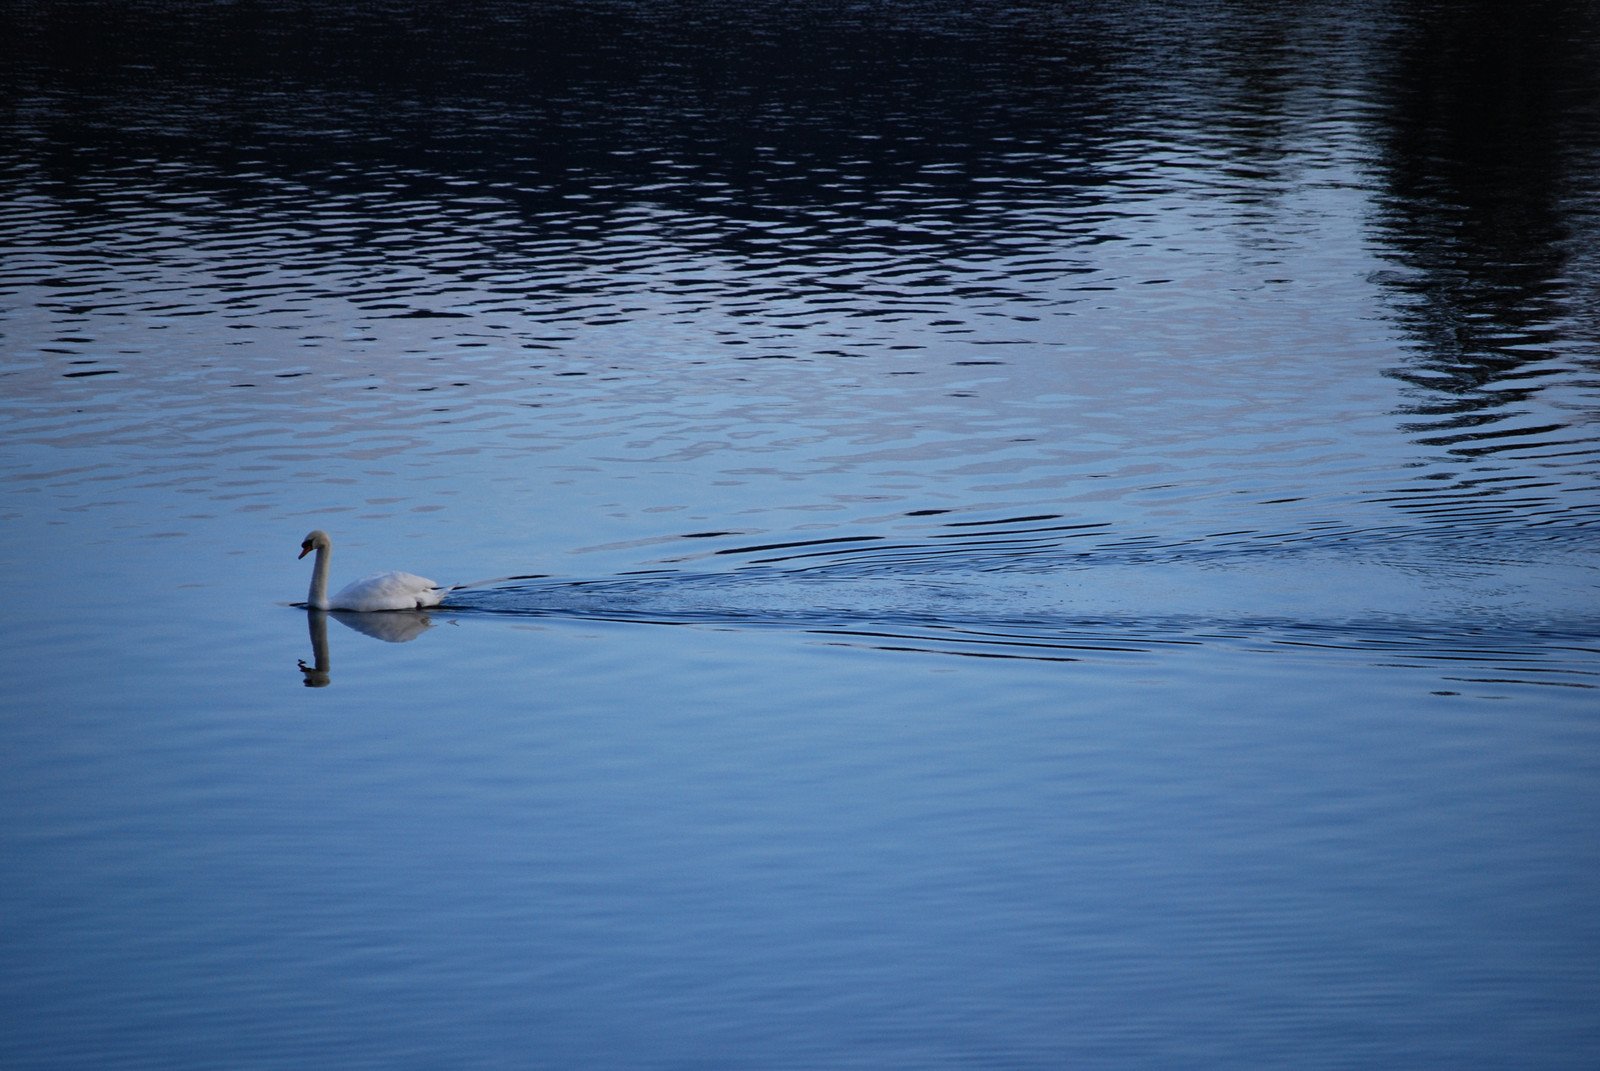 a lone white swan swims through the blue water